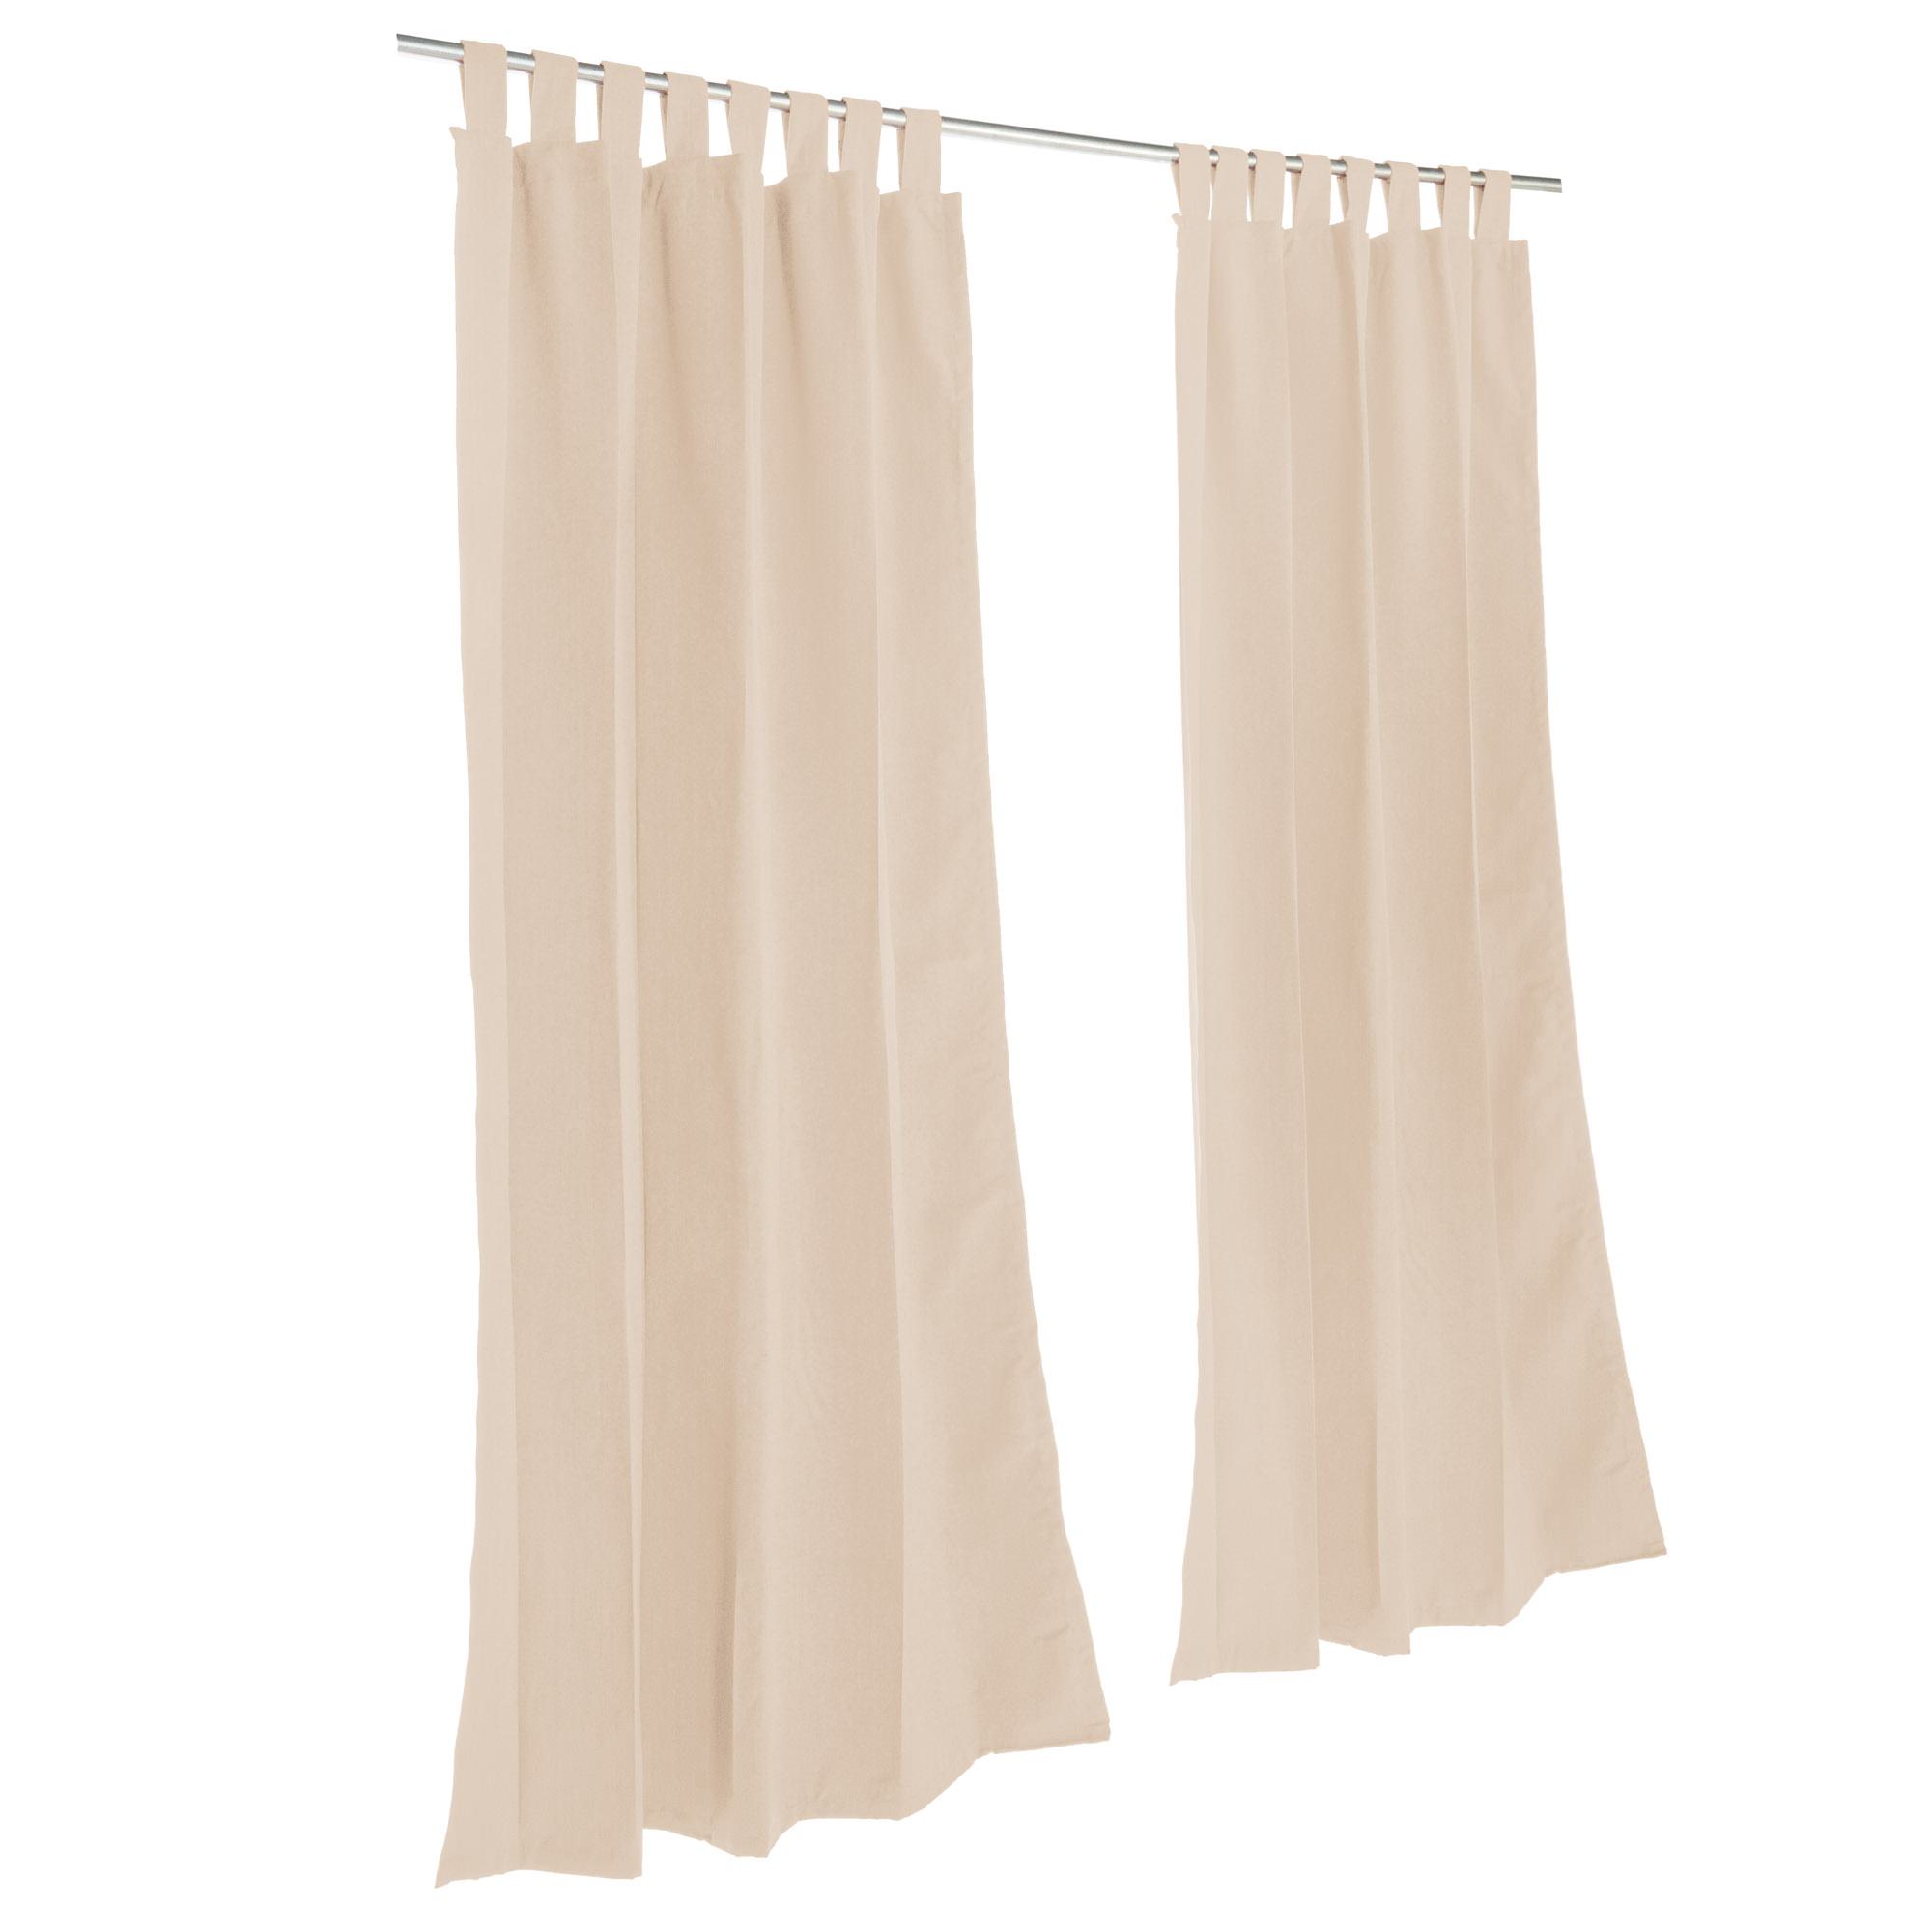 Canvas White Sunbrella Outdoor Curtains with Tabs